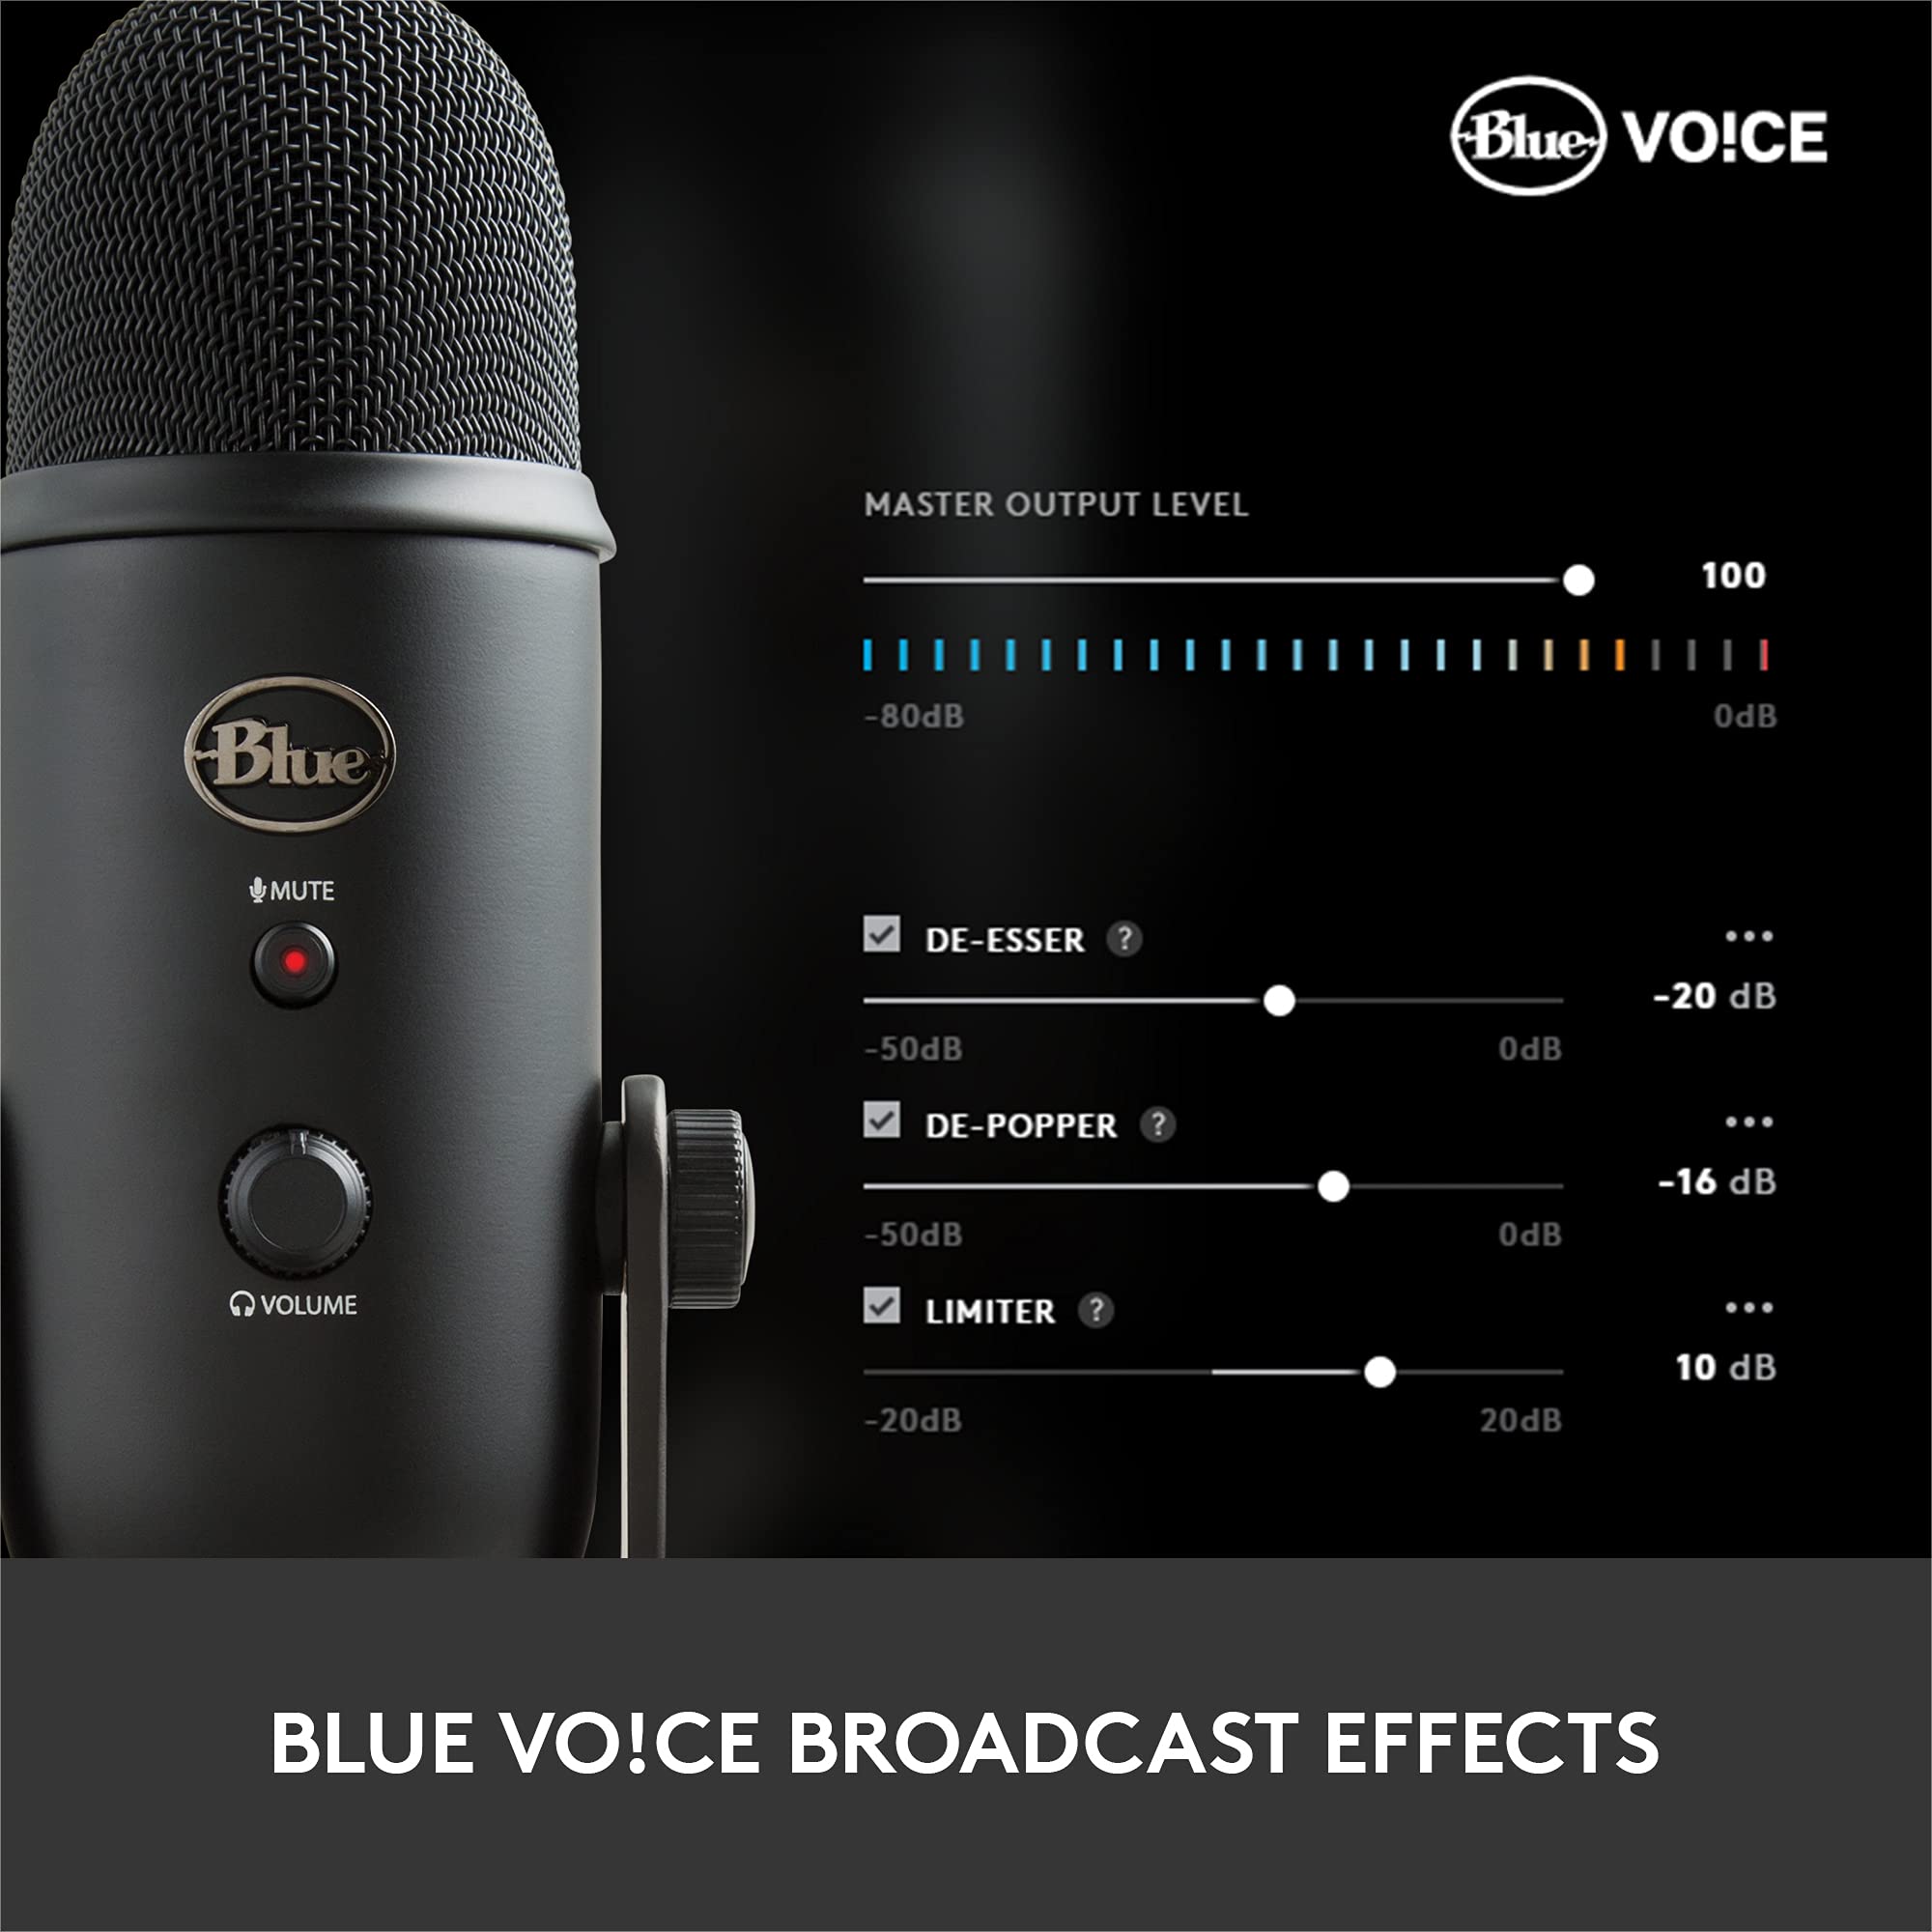 Logitech for Creators Blue Yeticaster Pro Broadcast Bundle with Yeti USB Microphone for Gaming, Recording, Streaming, Podcasting, Radius III Shockmount, Compass Mic Boom Arm, Blue VO!CE - Blackout